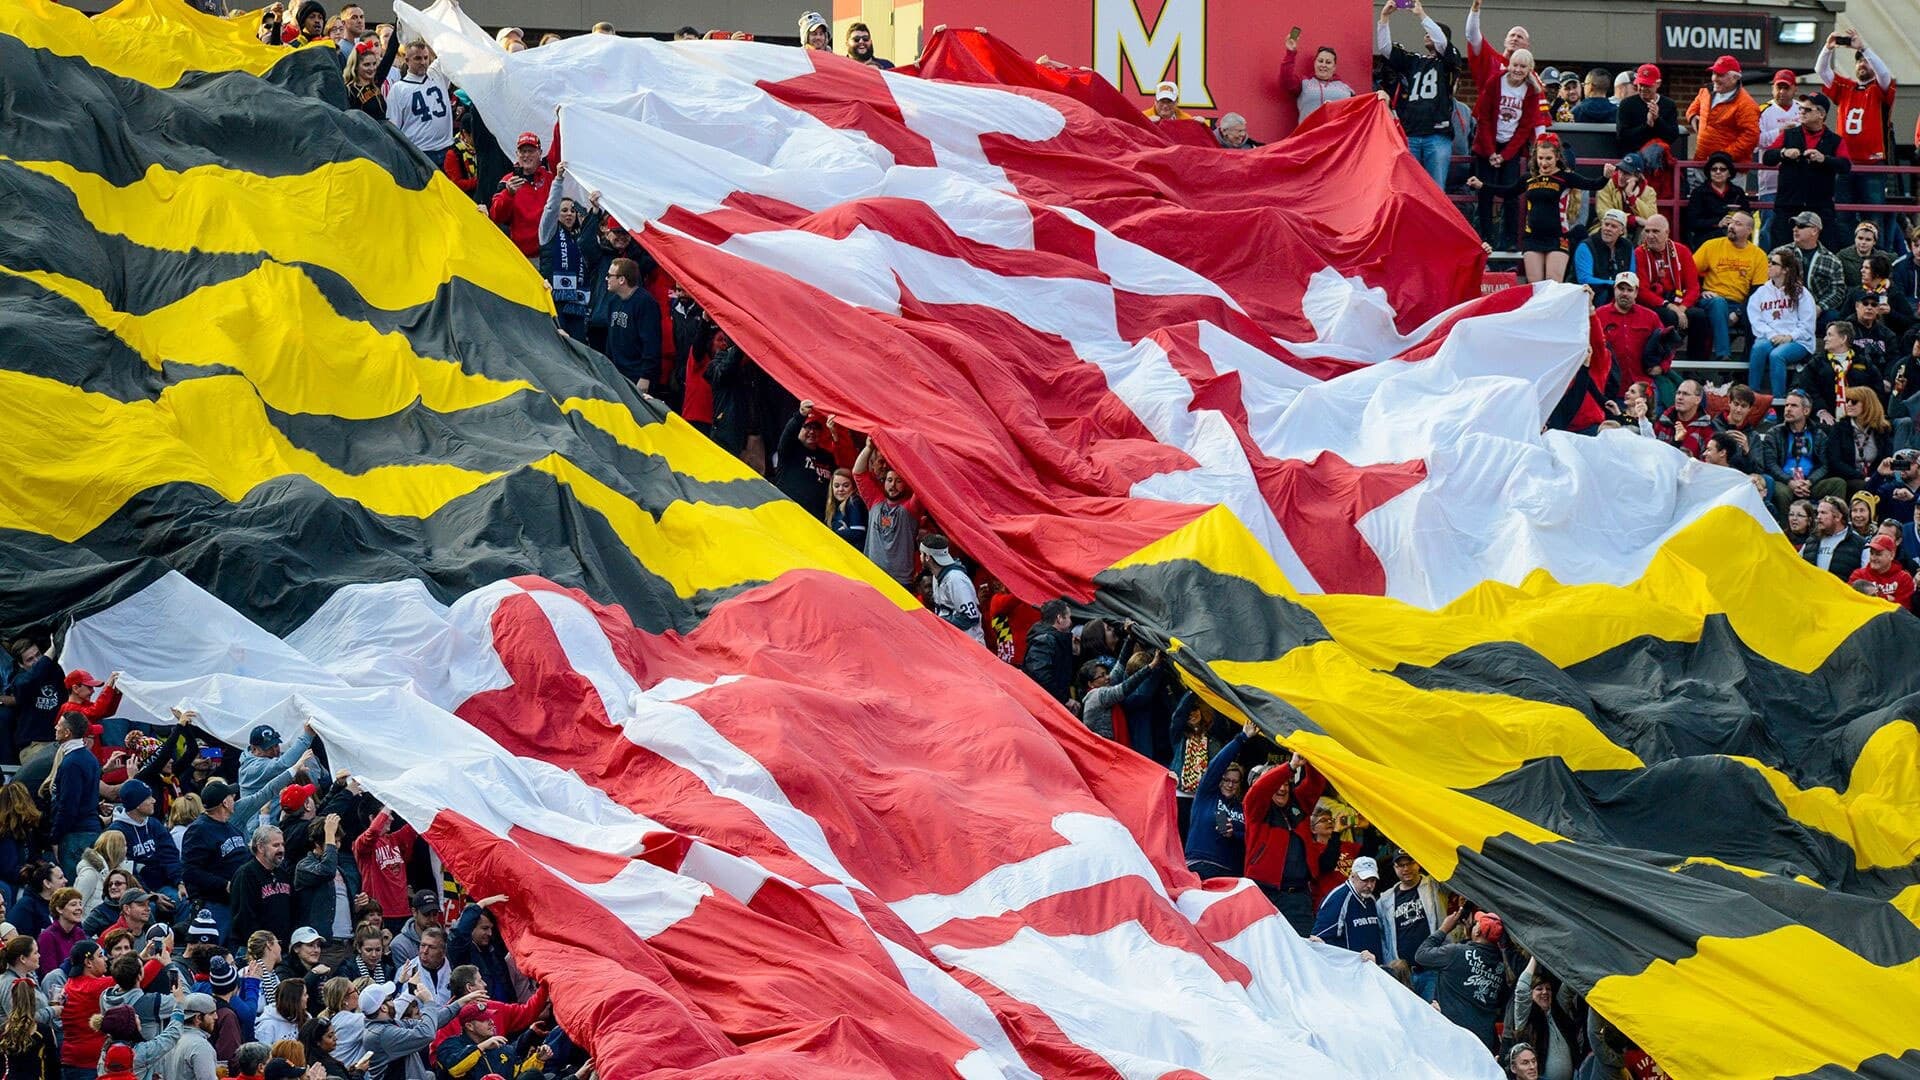 The Maryland flag being waved amidst the crowds.